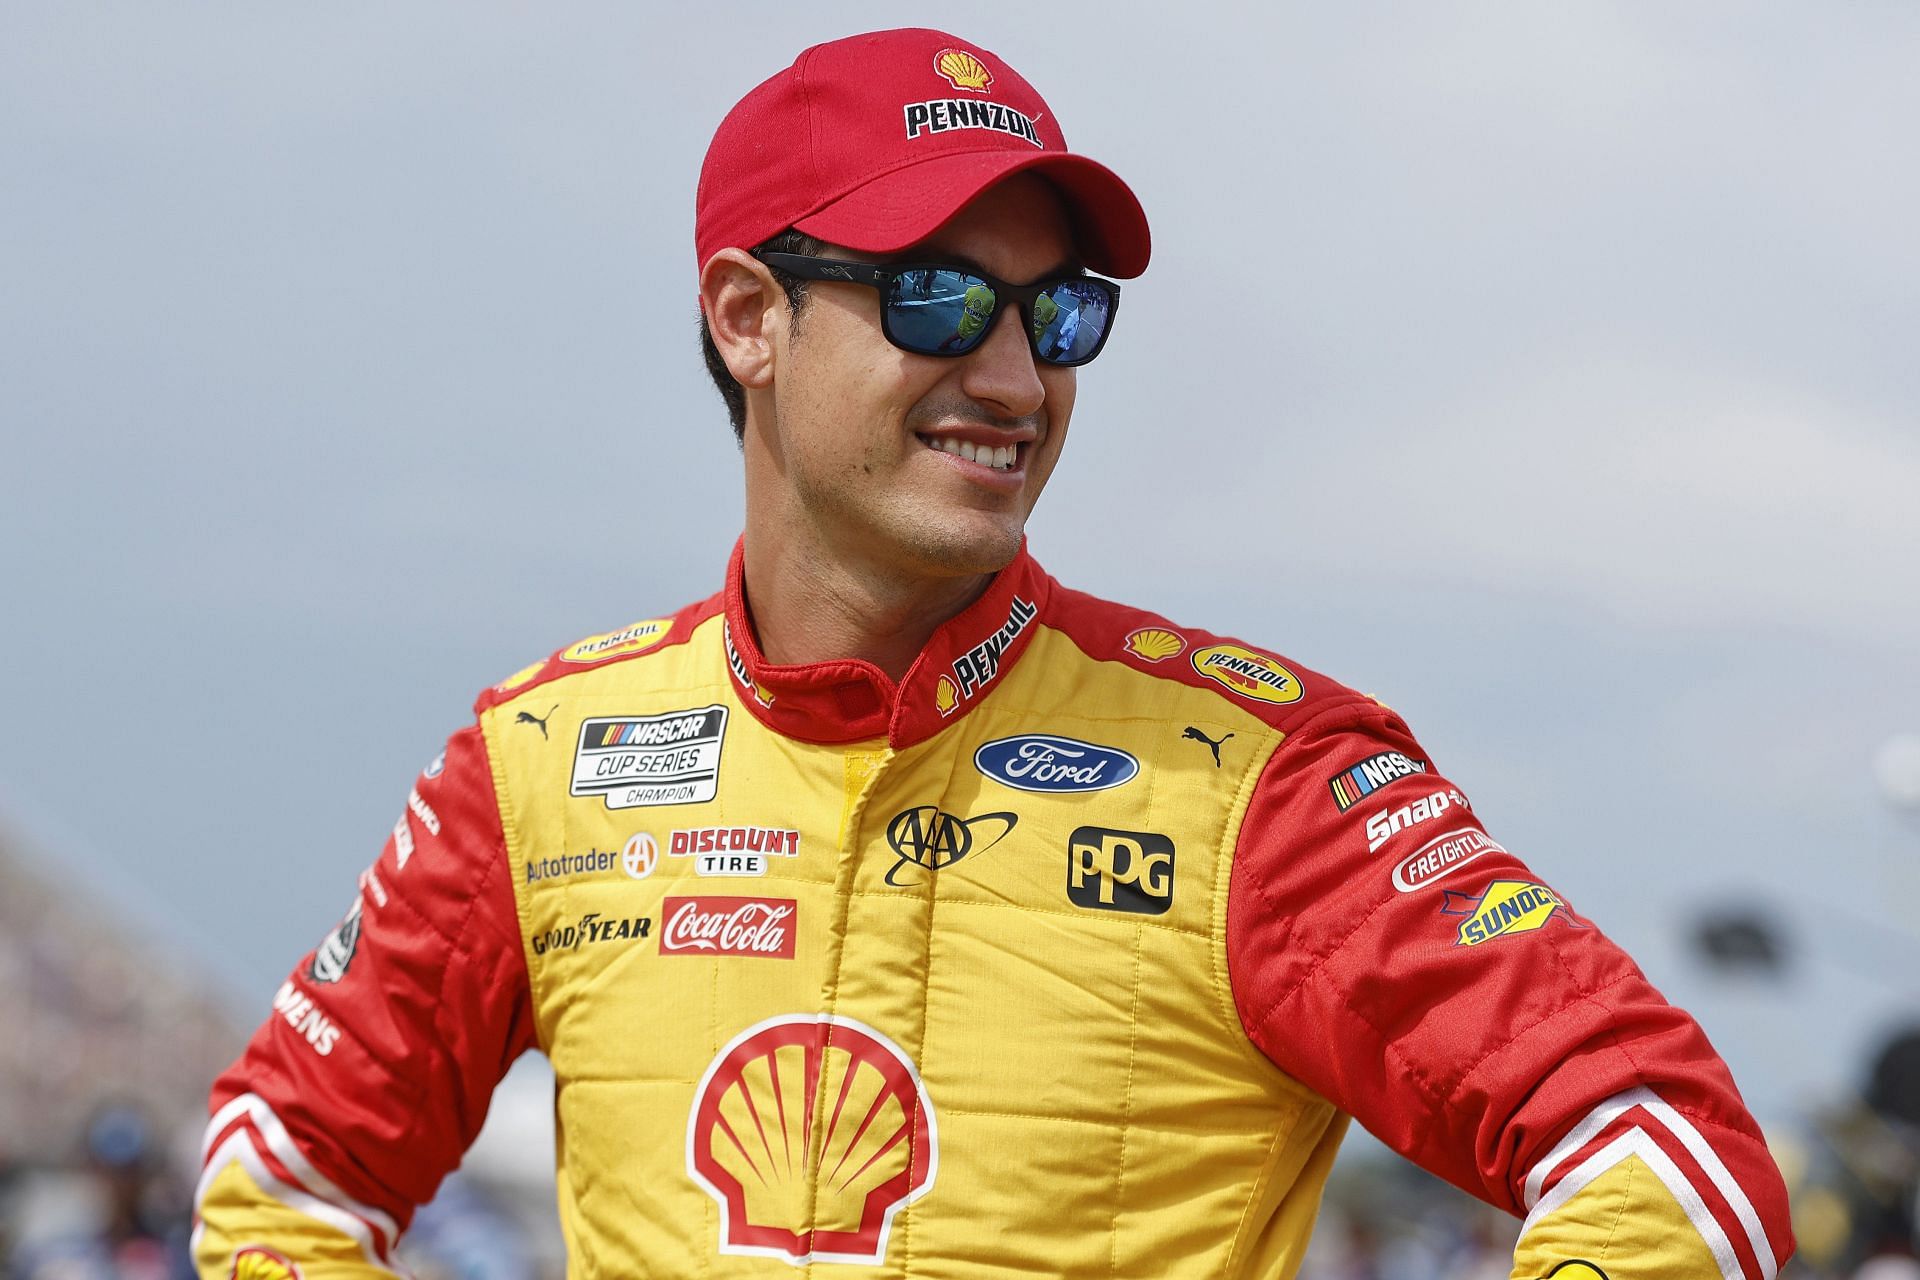 Joey Logano waits on the grid before the 2022 NASCAR Cup Series FireKeepers Casino 400 at Michigan International Speedway in Brooklyn, Michigan. (Photo by Sean Gardner/Getty Images)